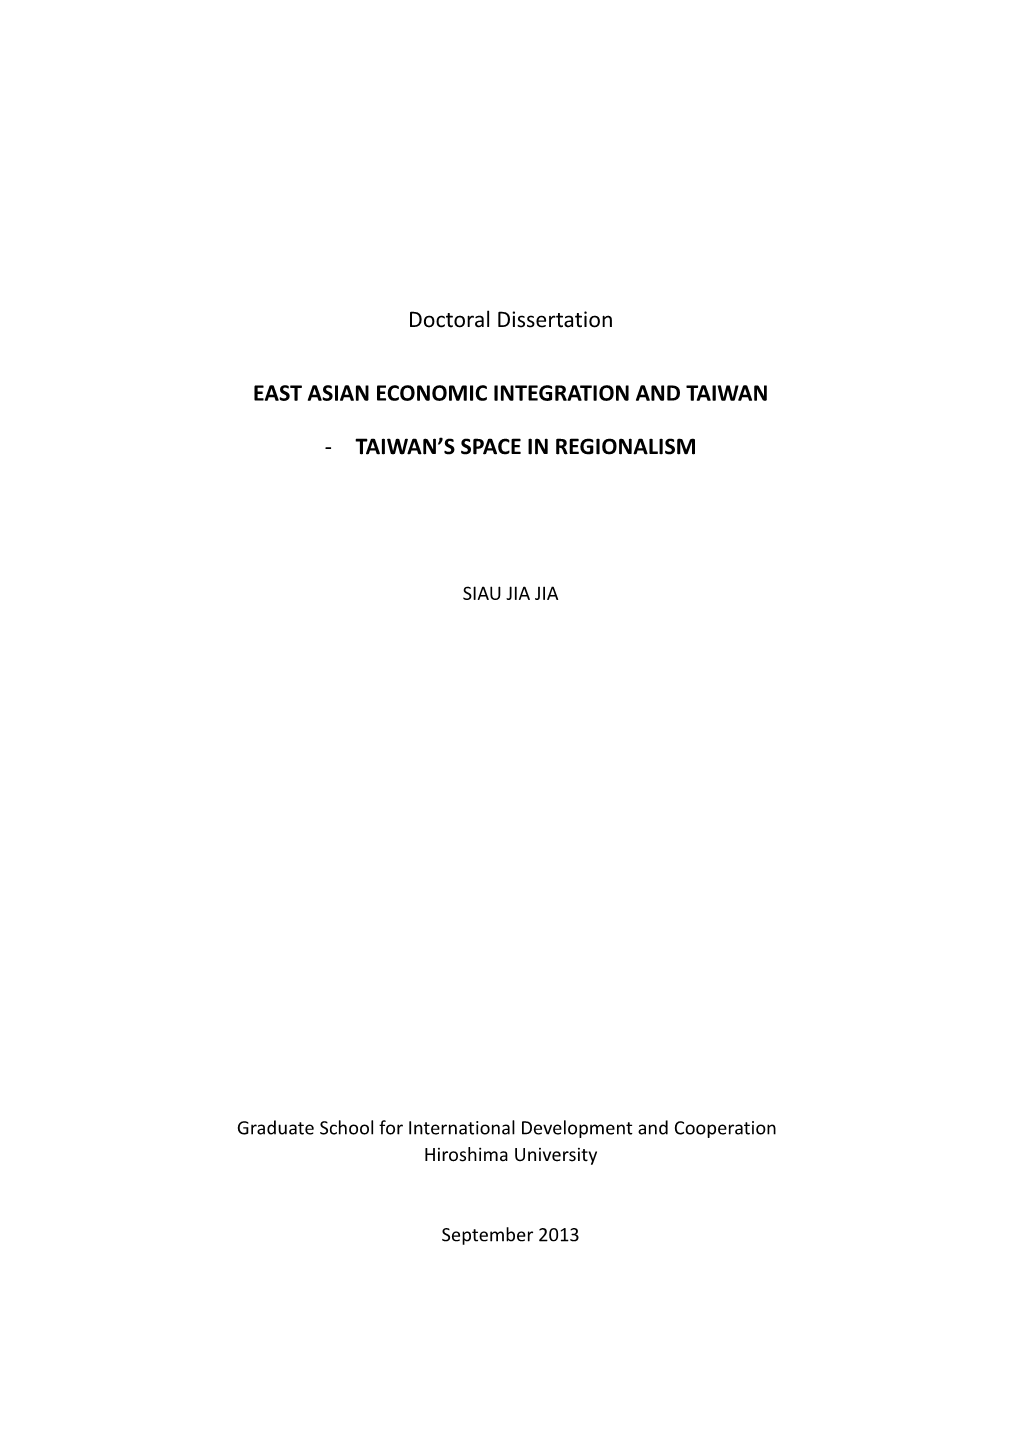 Doctoral Dissertation EAST ASIAN ECONOMIC INTEGRATION AND